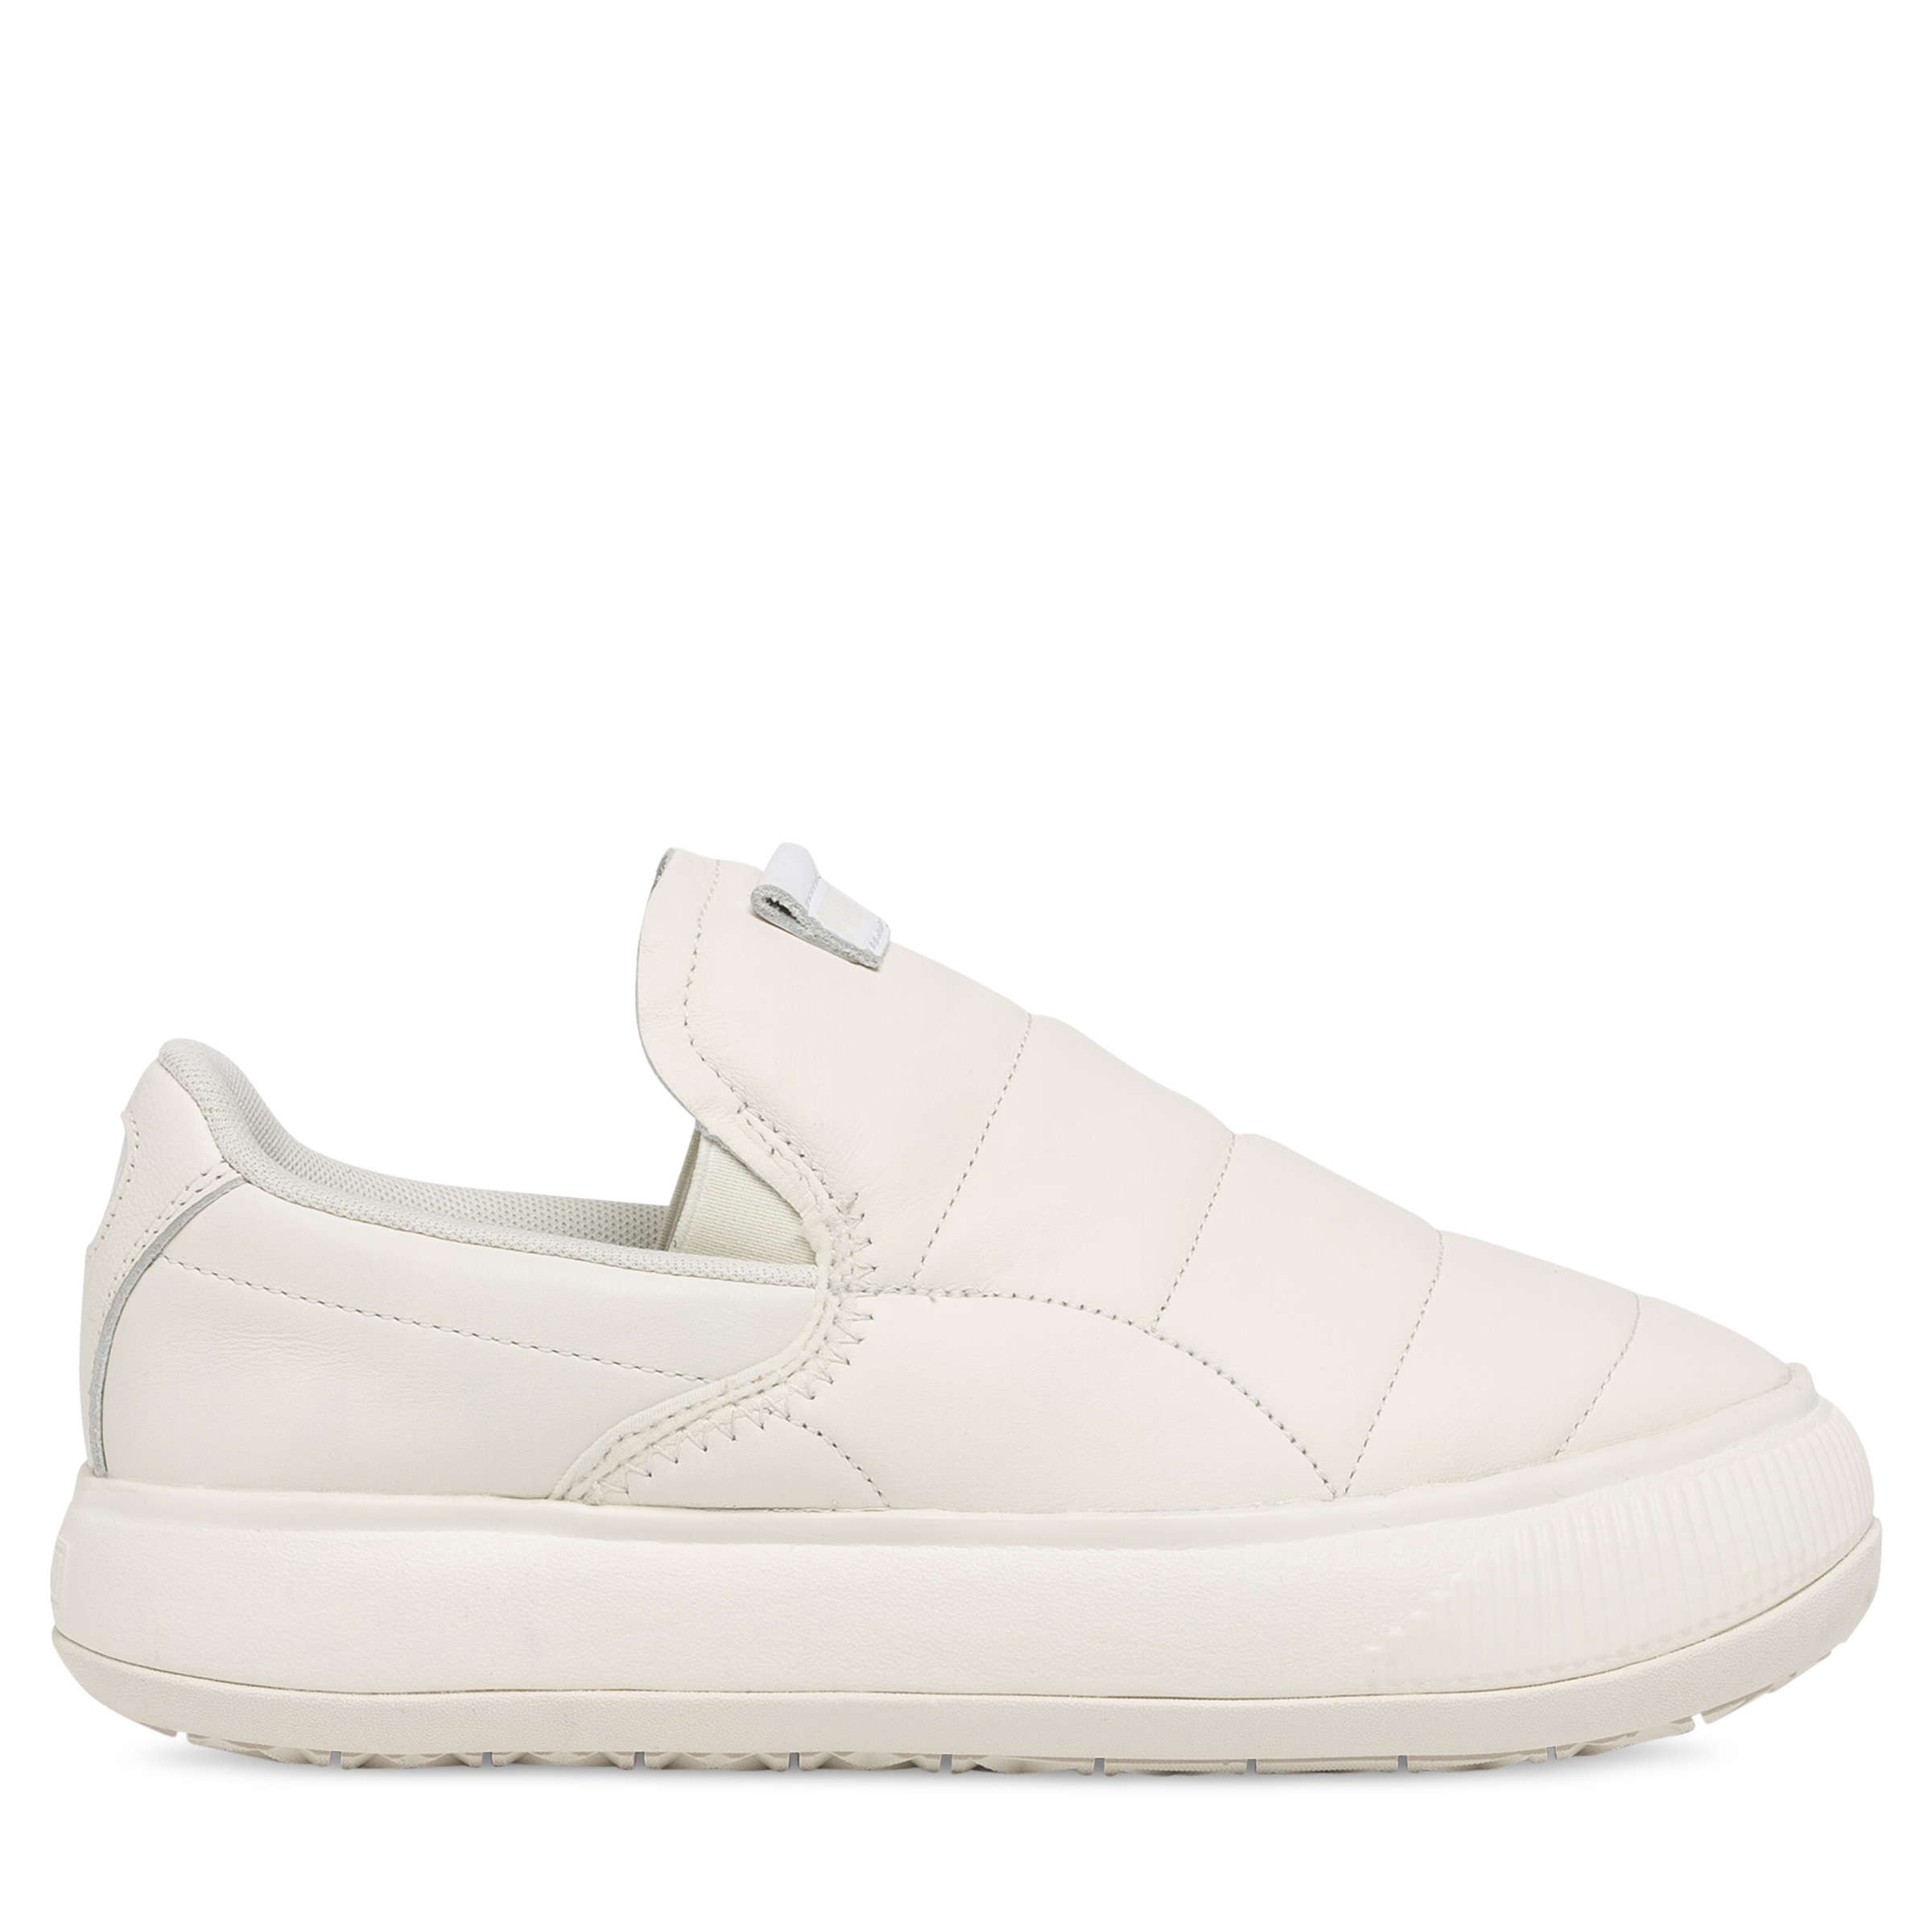 Puma Suede Mayu Slip-On Leather Womens Marshmallow | Hype DC